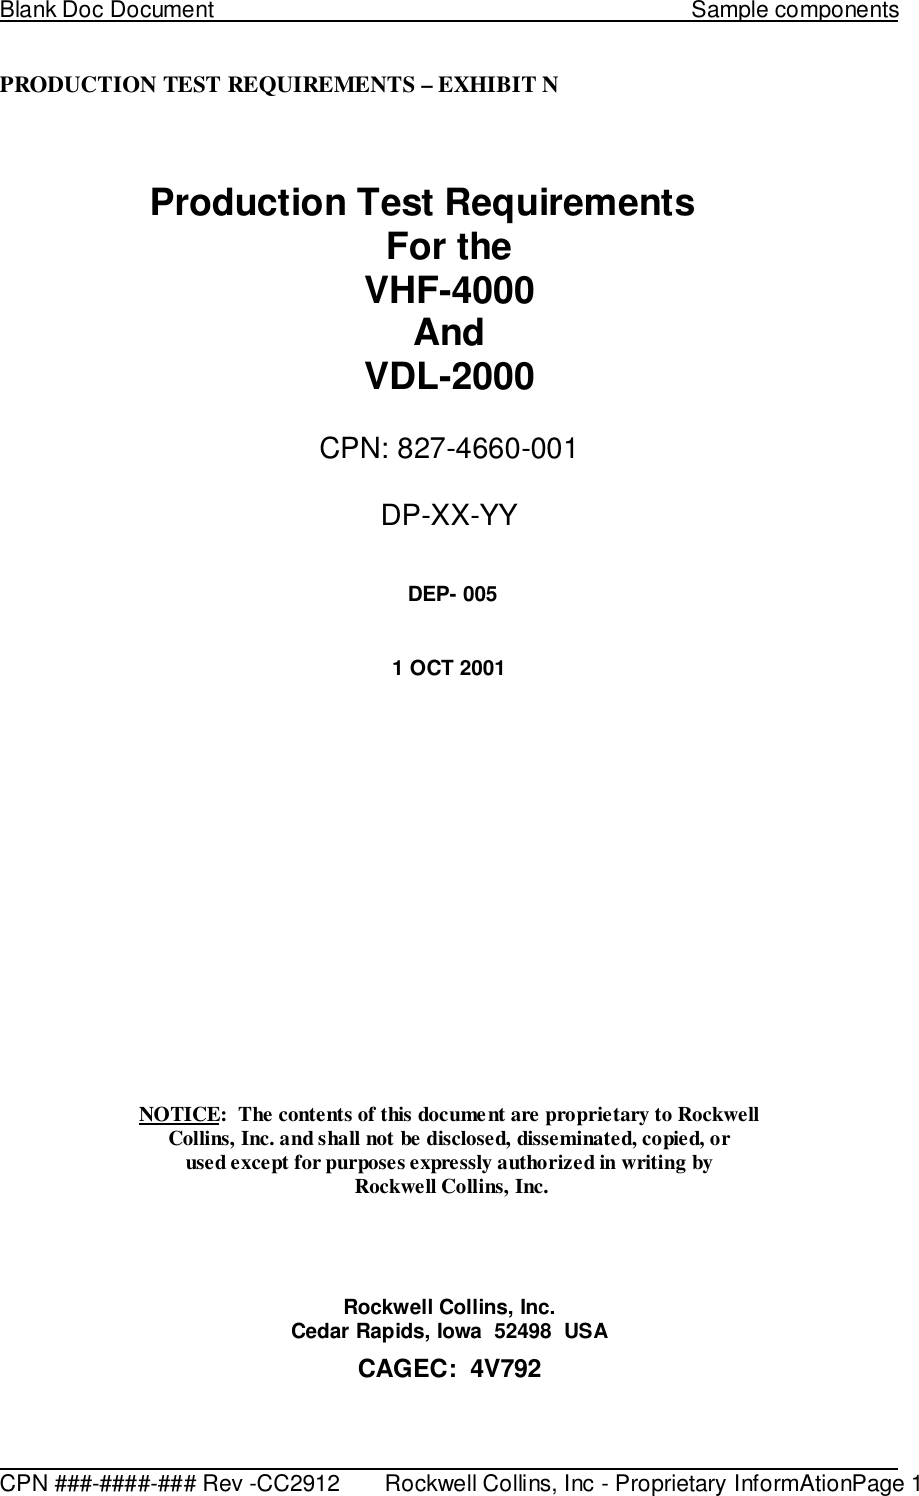 Blank Doc Document                                                                             Sample components                                                                                                                                                CPN ###-####-### Rev -CC2912       Rockwell Collins, Inc - Proprietary InformAtionPage 1PRODUCTION TEST REQUIREMENTS – EXHIBIT NProduction Test RequirementsFor theVHF-4000AndVDL-2000CPN: 827-4660-001DP-XX-YY DEP- 0051 OCT 2001NOTICE:  The contents of this document are proprietary to RockwellCollins, Inc. and shall not be disclosed, disseminated, copied, orused except for purposes expressly authorized in writing by Rockwell Collins, Inc.Rockwell Collins, Inc.Cedar Rapids, Iowa  52498  USACAGEC:  4V792